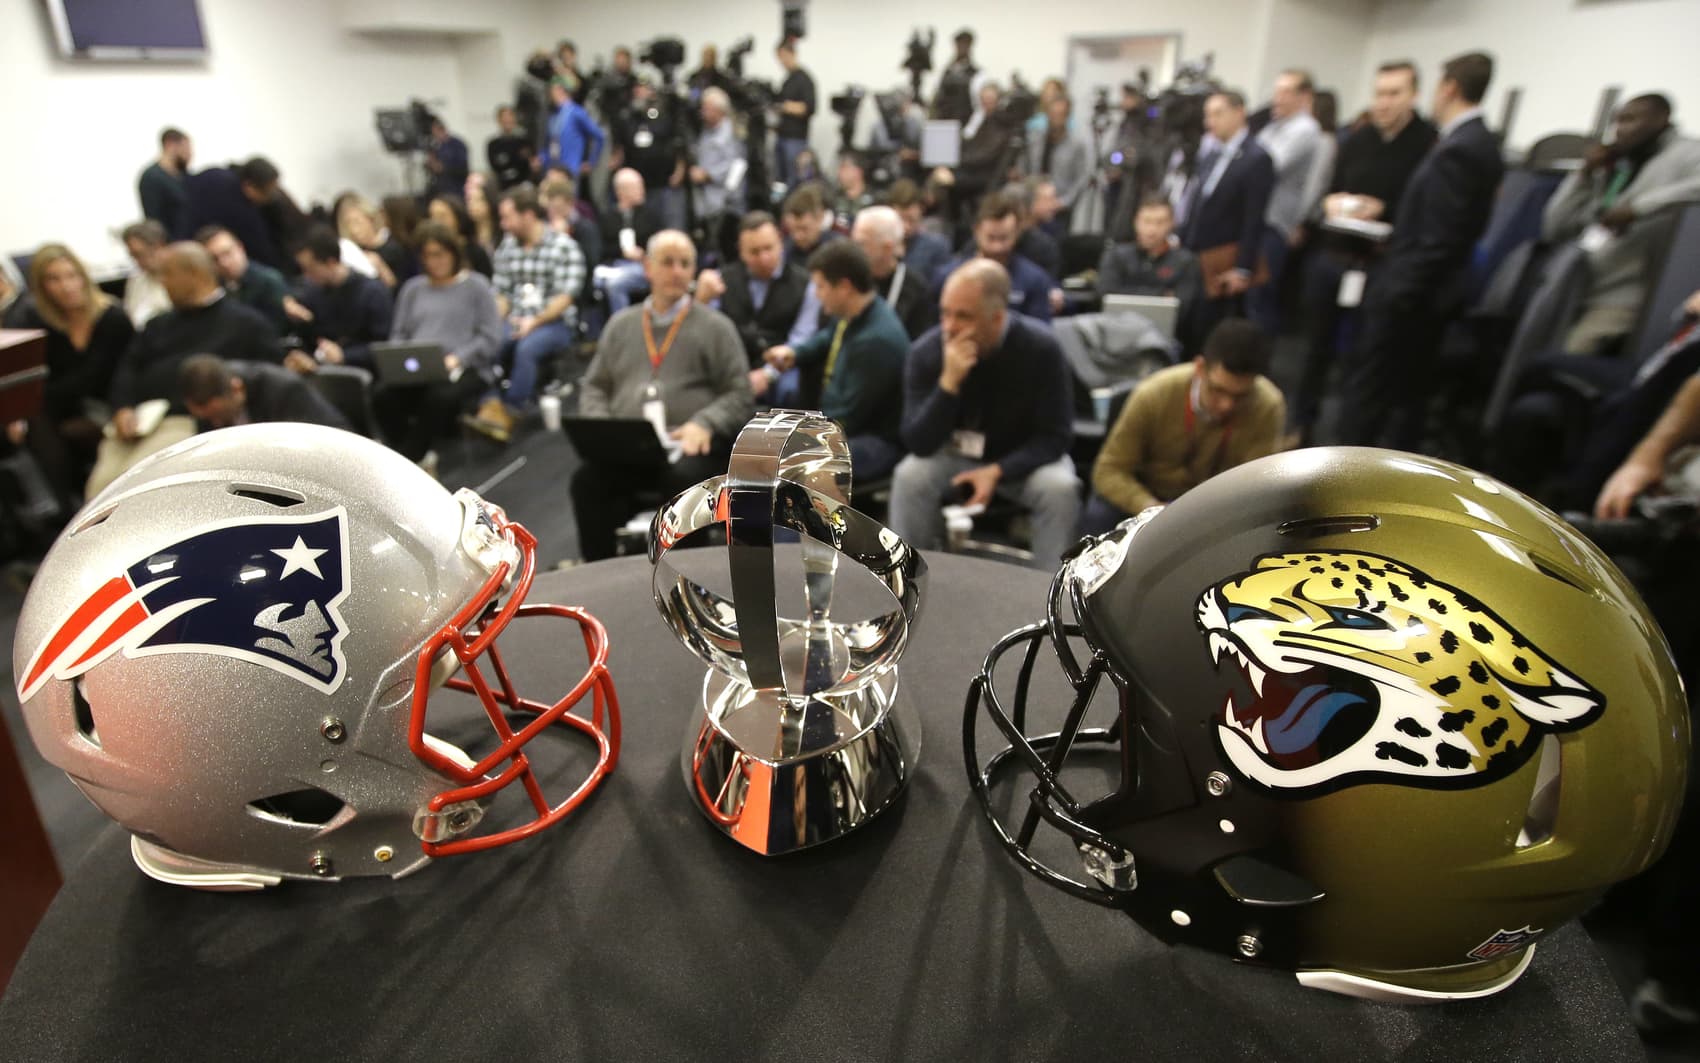 A New England Patriots helmet, left, a Lamar Hunt AFC Championship trophy, center, and a Jacksonville Jaguars helmet, right, are displayed on a podium in front of members of the media, behind, before the start of an NFL football news conference, Wednesday, Jan. 17, 2018, at Gillette Stadium, in Foxborough, Mass. The New England Patriots host the Jacksonville Jaguars in the AFC championship on Sunday (AP Photo/Steven Senne)